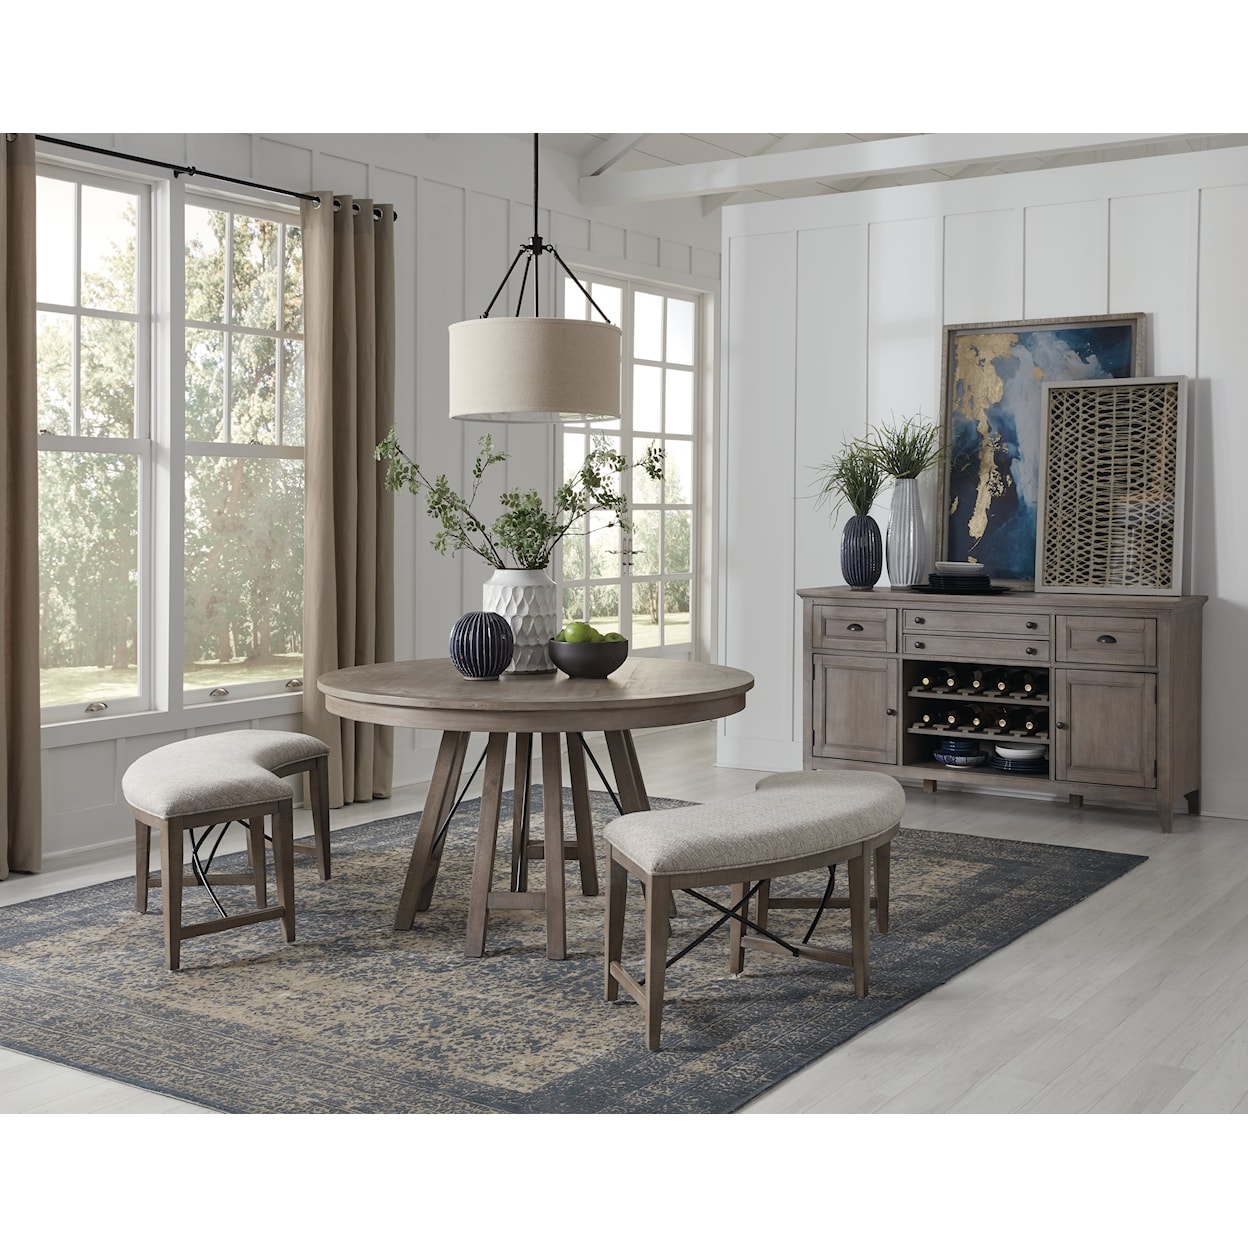 Magnussen Home Paxton Place Dining Casual Dining Room Group